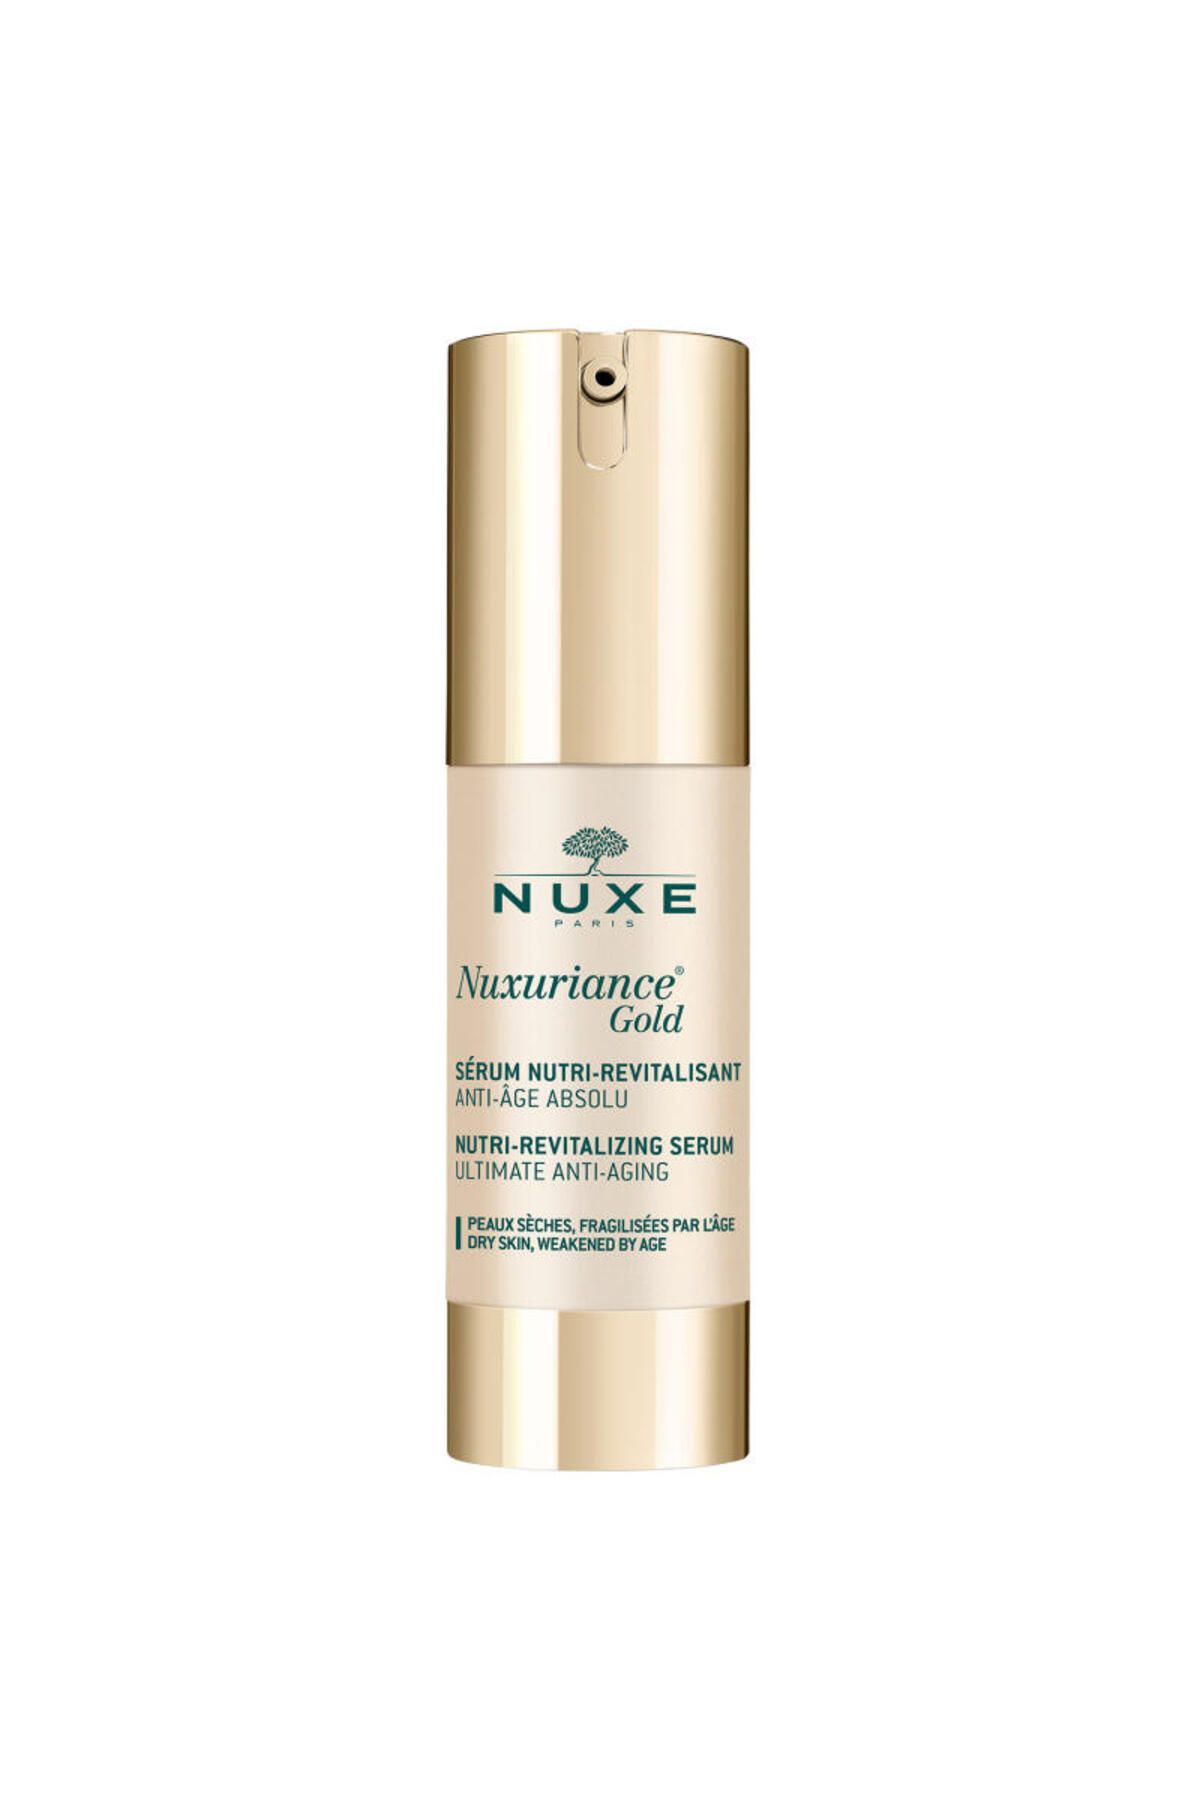 Nuxe Nuxuriance Gold Nutri Revitalizing Serum 30 ml